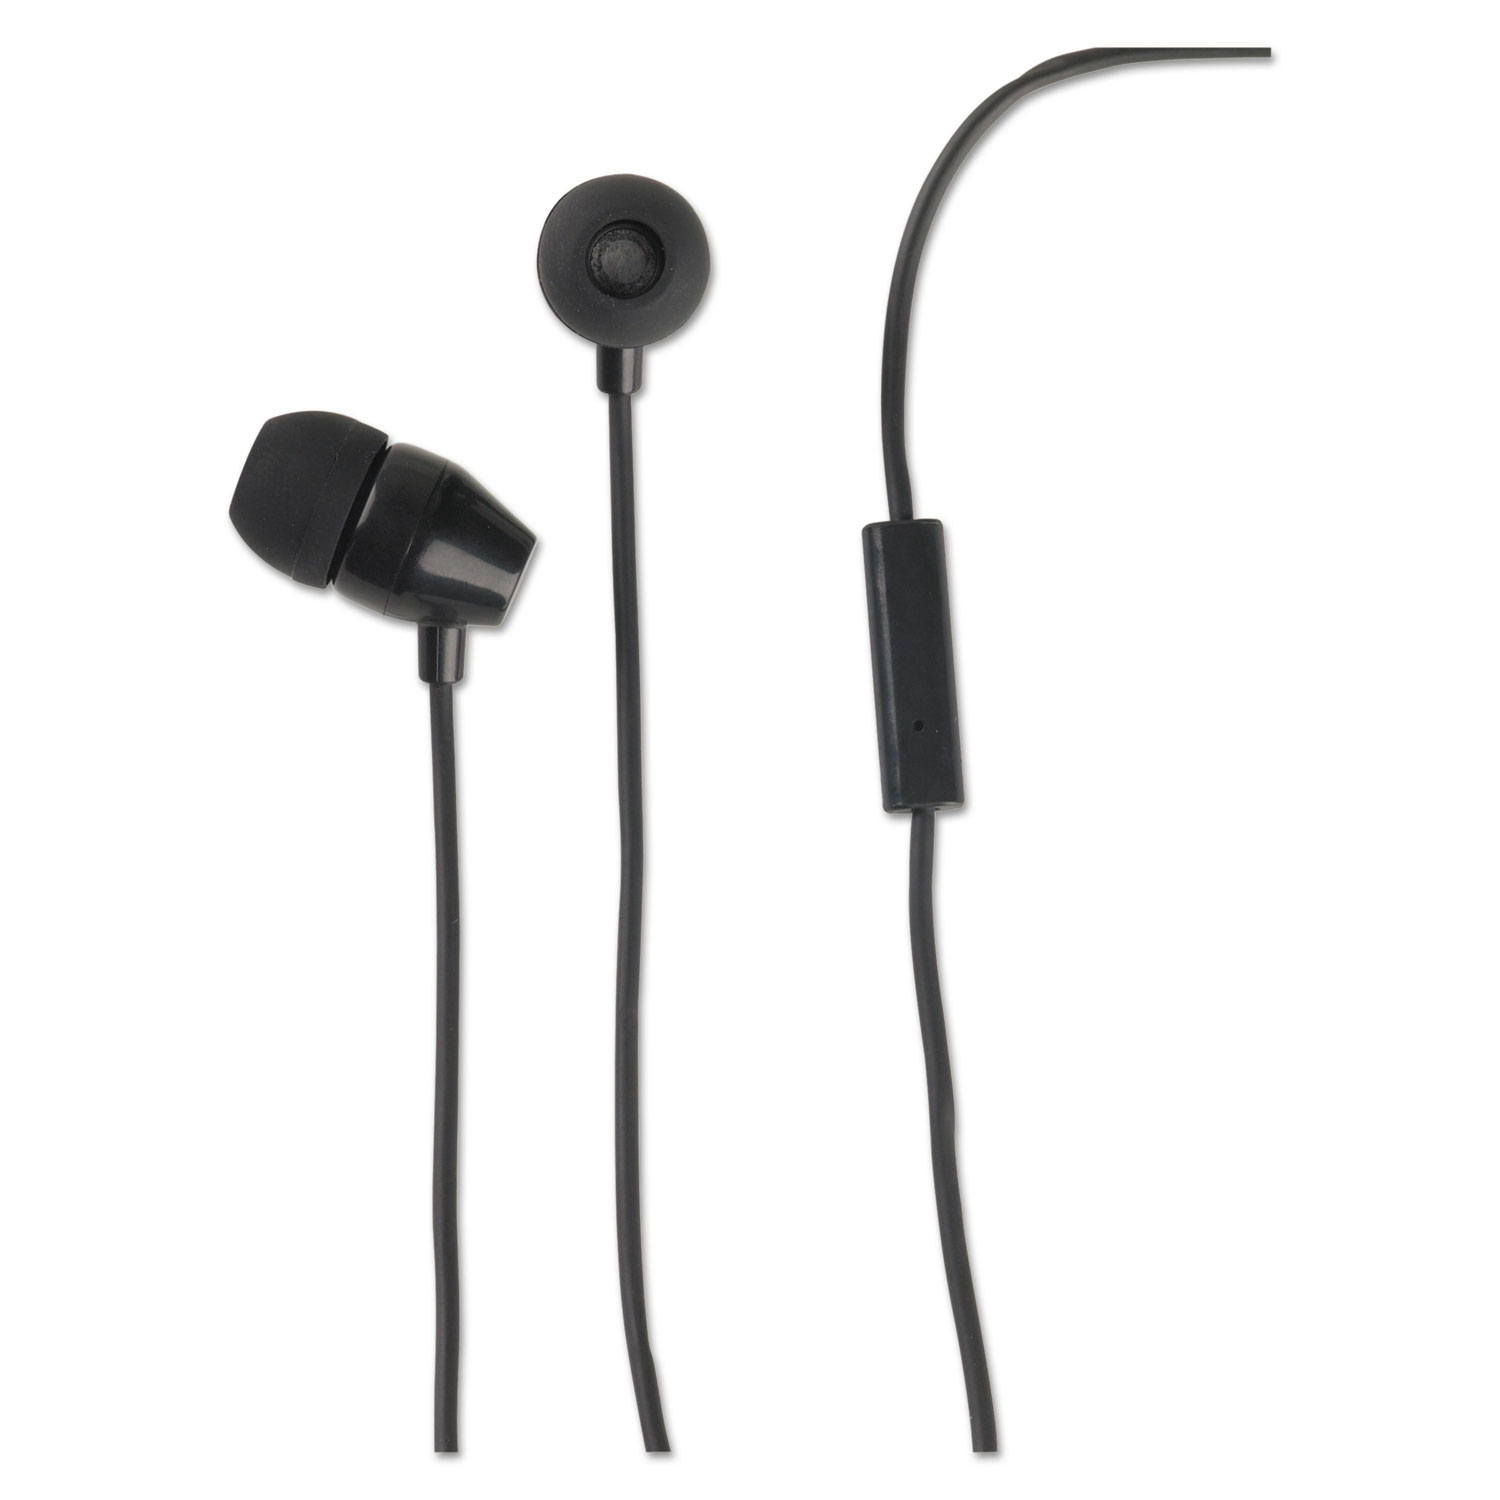 Noise Isolating Earbuds with In-line Microphone, Black